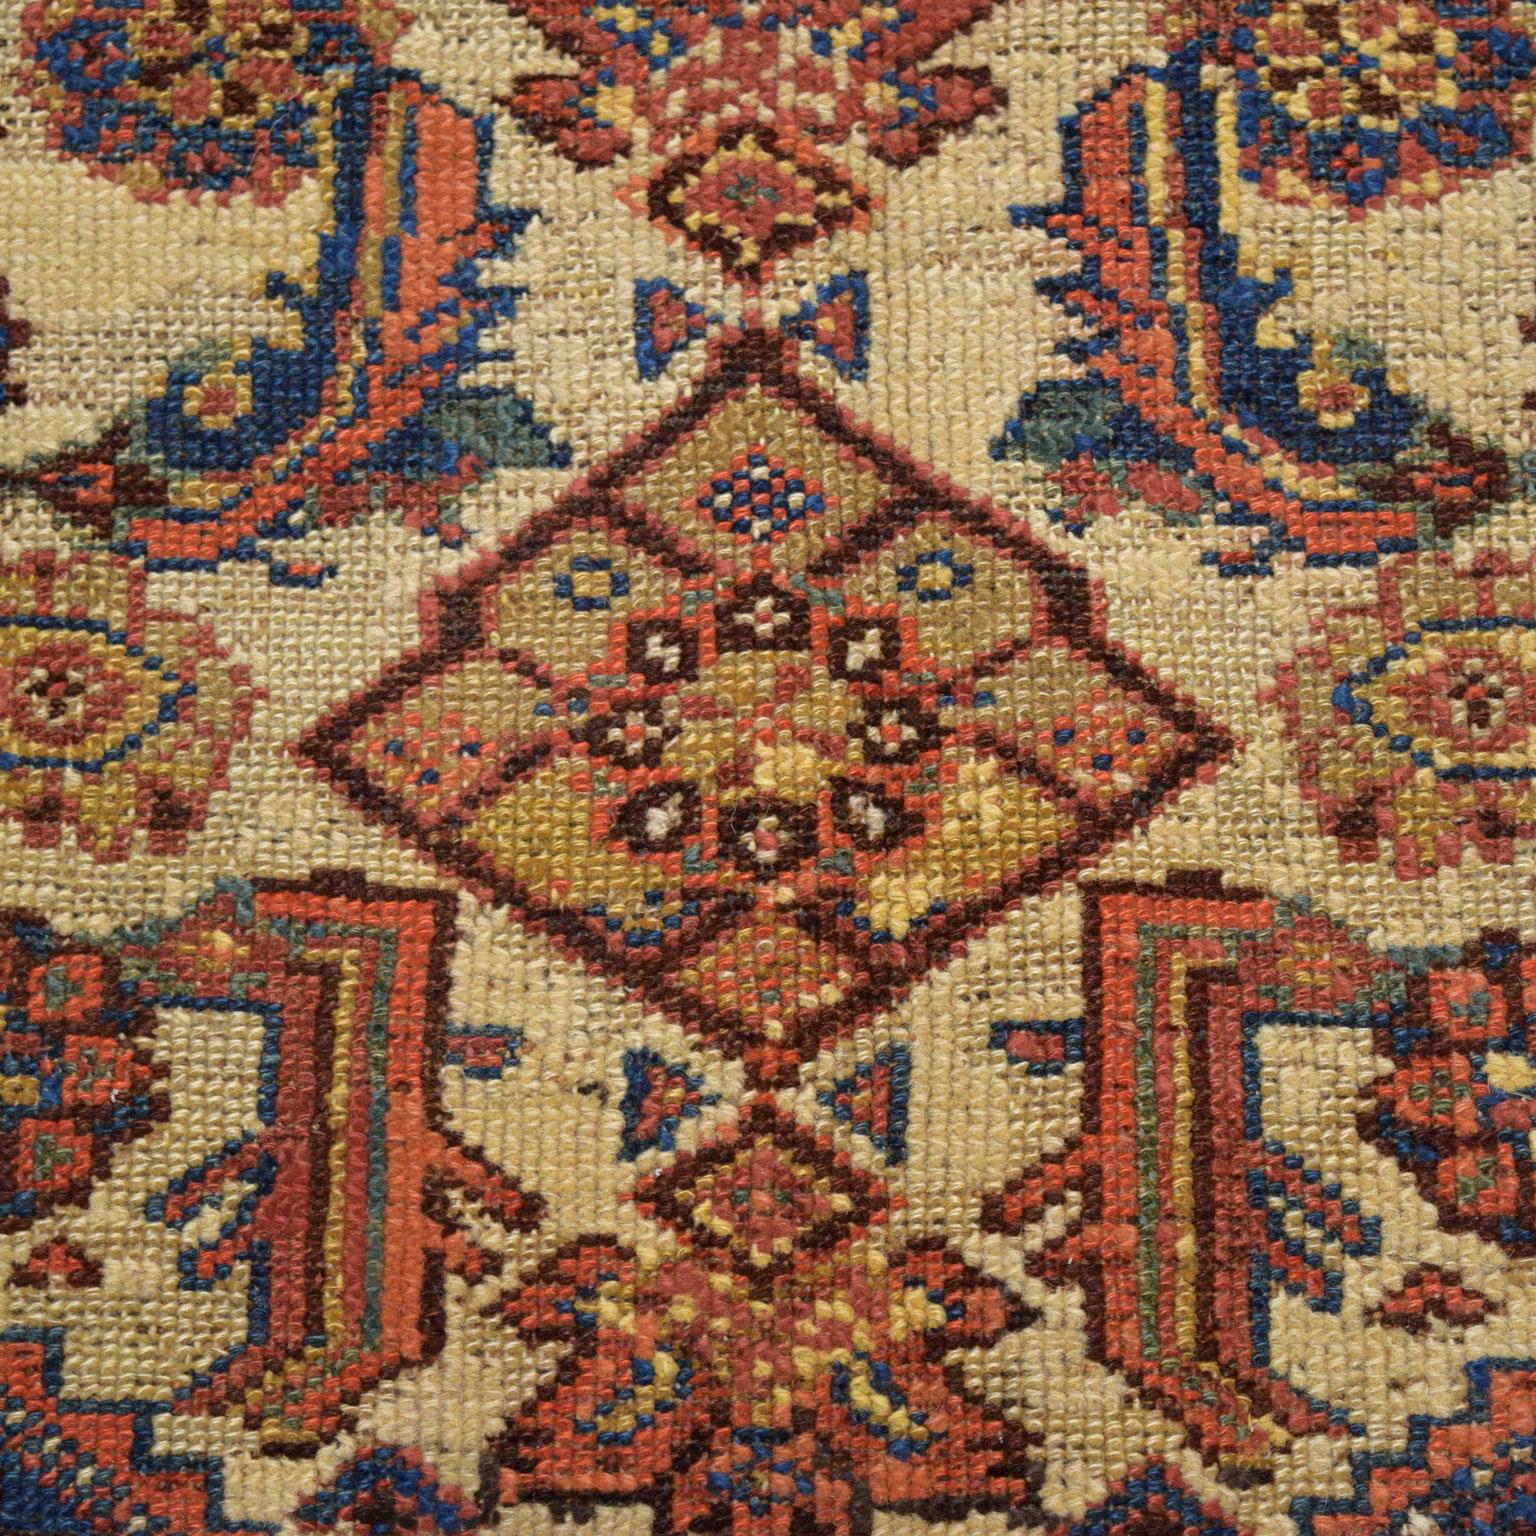 Antique 1900s Wool Persian Saraband Rug, Blue, Red, and Orange, 5' x 7' In Excellent Condition For Sale In New York, NY